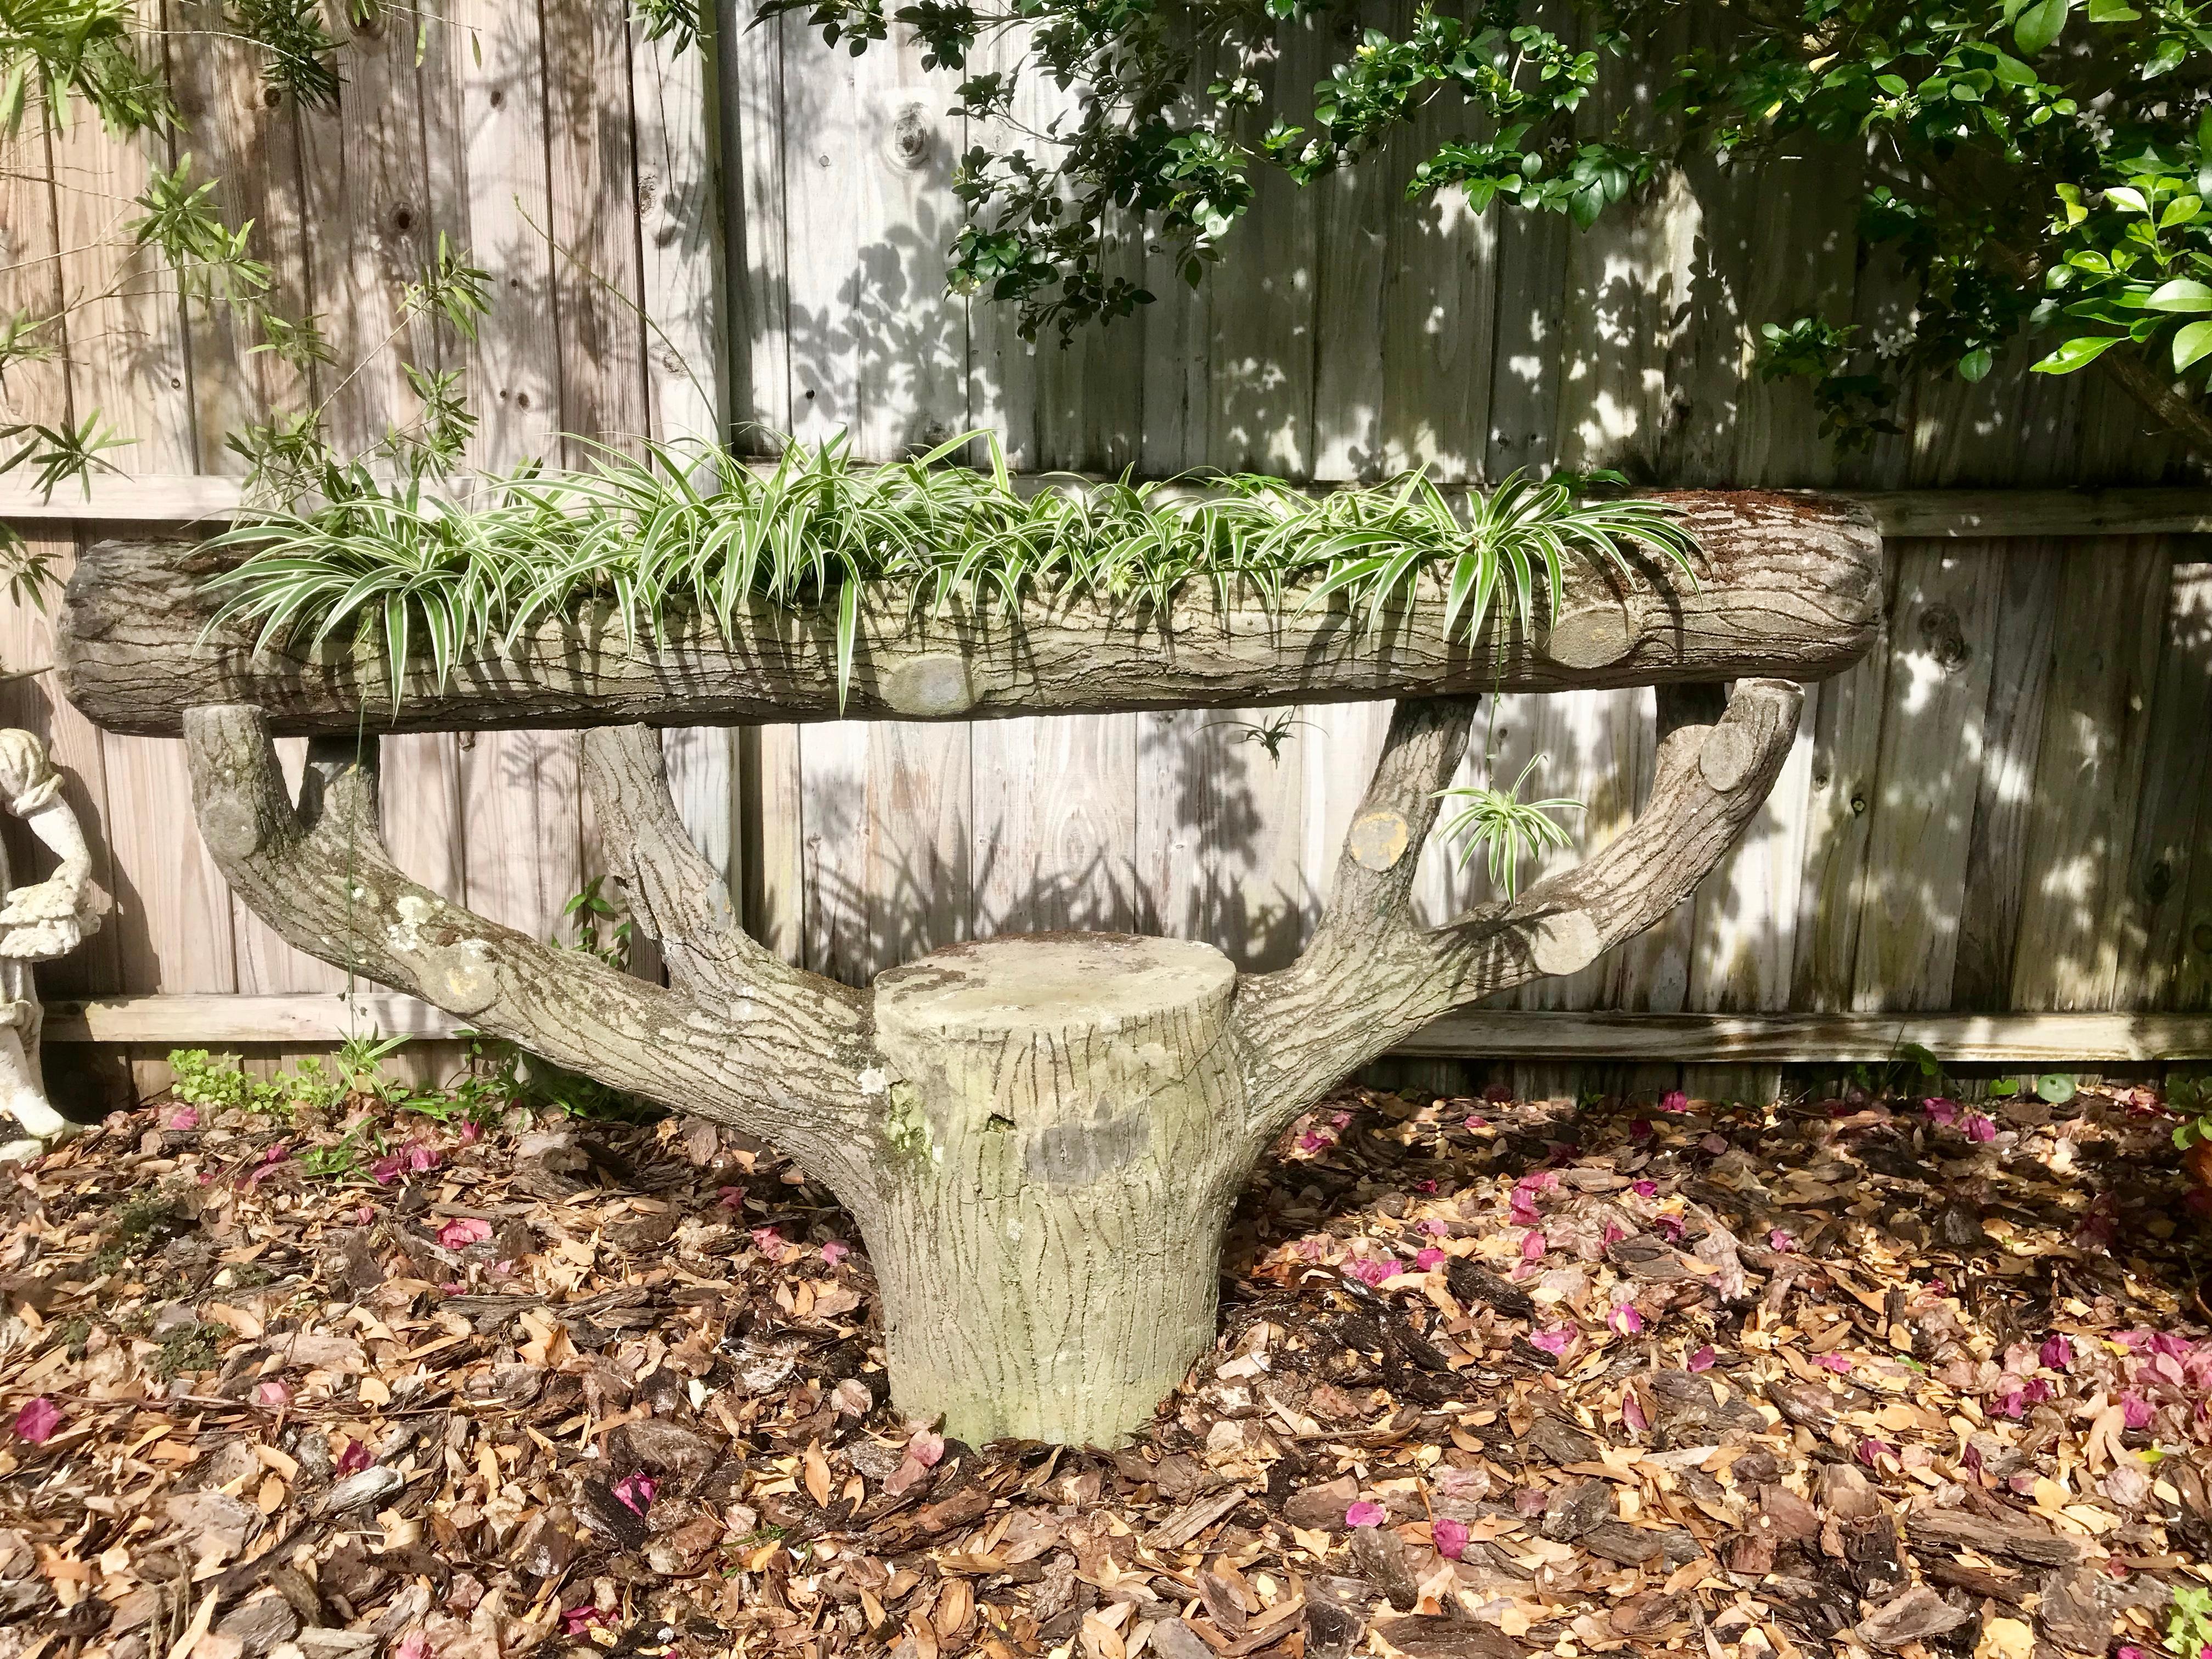 An unusual French faux bois concrete planter. Very realistic sculpted tree stump with cut limbs and textured bark. A hollowed out concrete log rests across the top and has drainage holes for plants. Fantastic old mossy patina. Very heavy and well